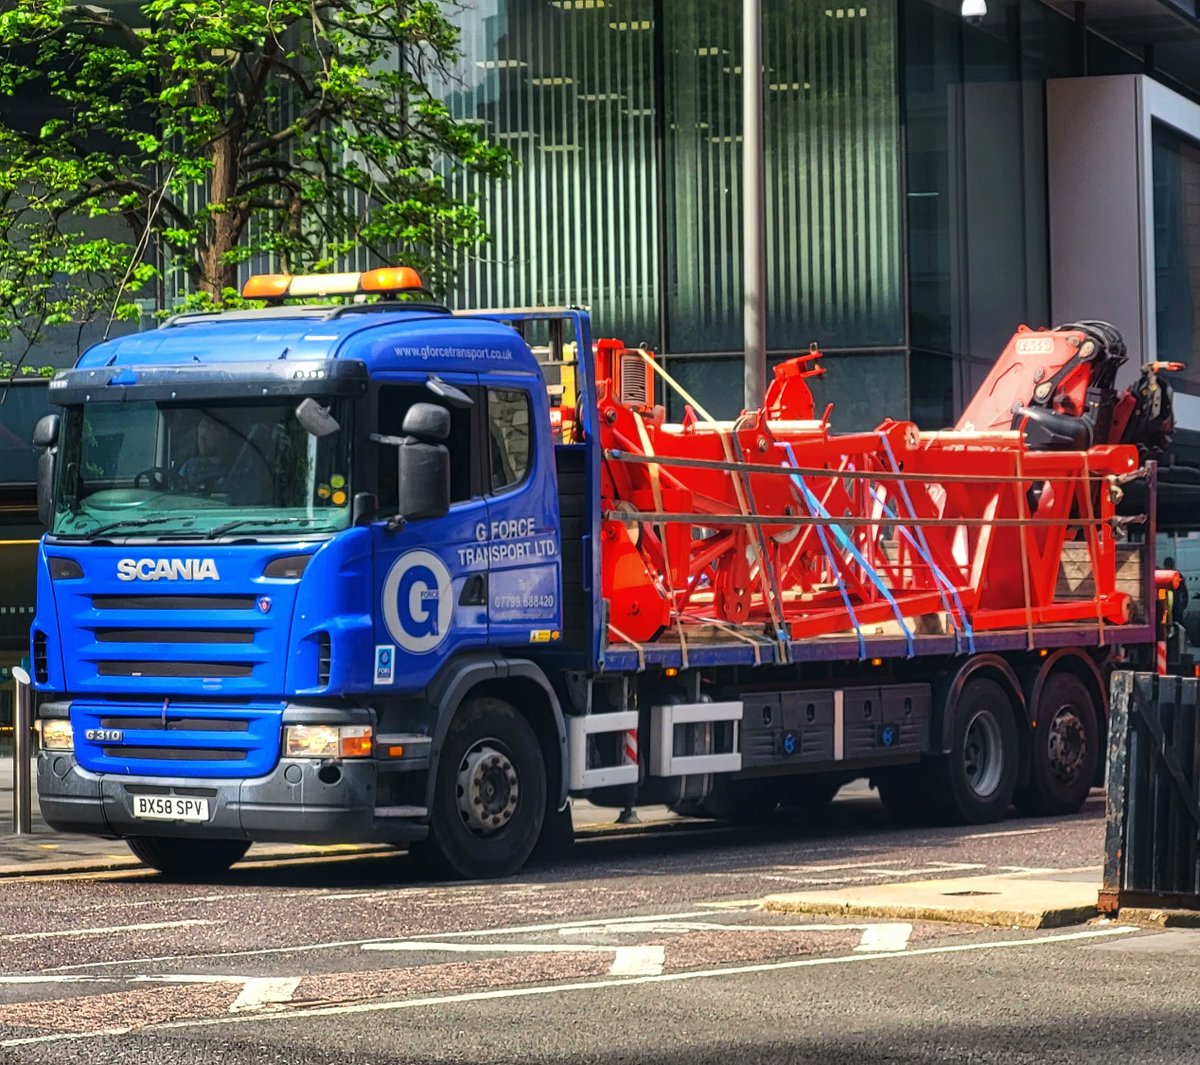 3 wagons, a Forklift lift plan, a Lorry loader lift plan and the #wolffkran Derrick Crane is effiently picked up from #8bishopsgate 

#liftingoperations #liftingsolutions #liftandshift #machinerymovement #compactcranes     #loveconstruction #ukconstruction #safety